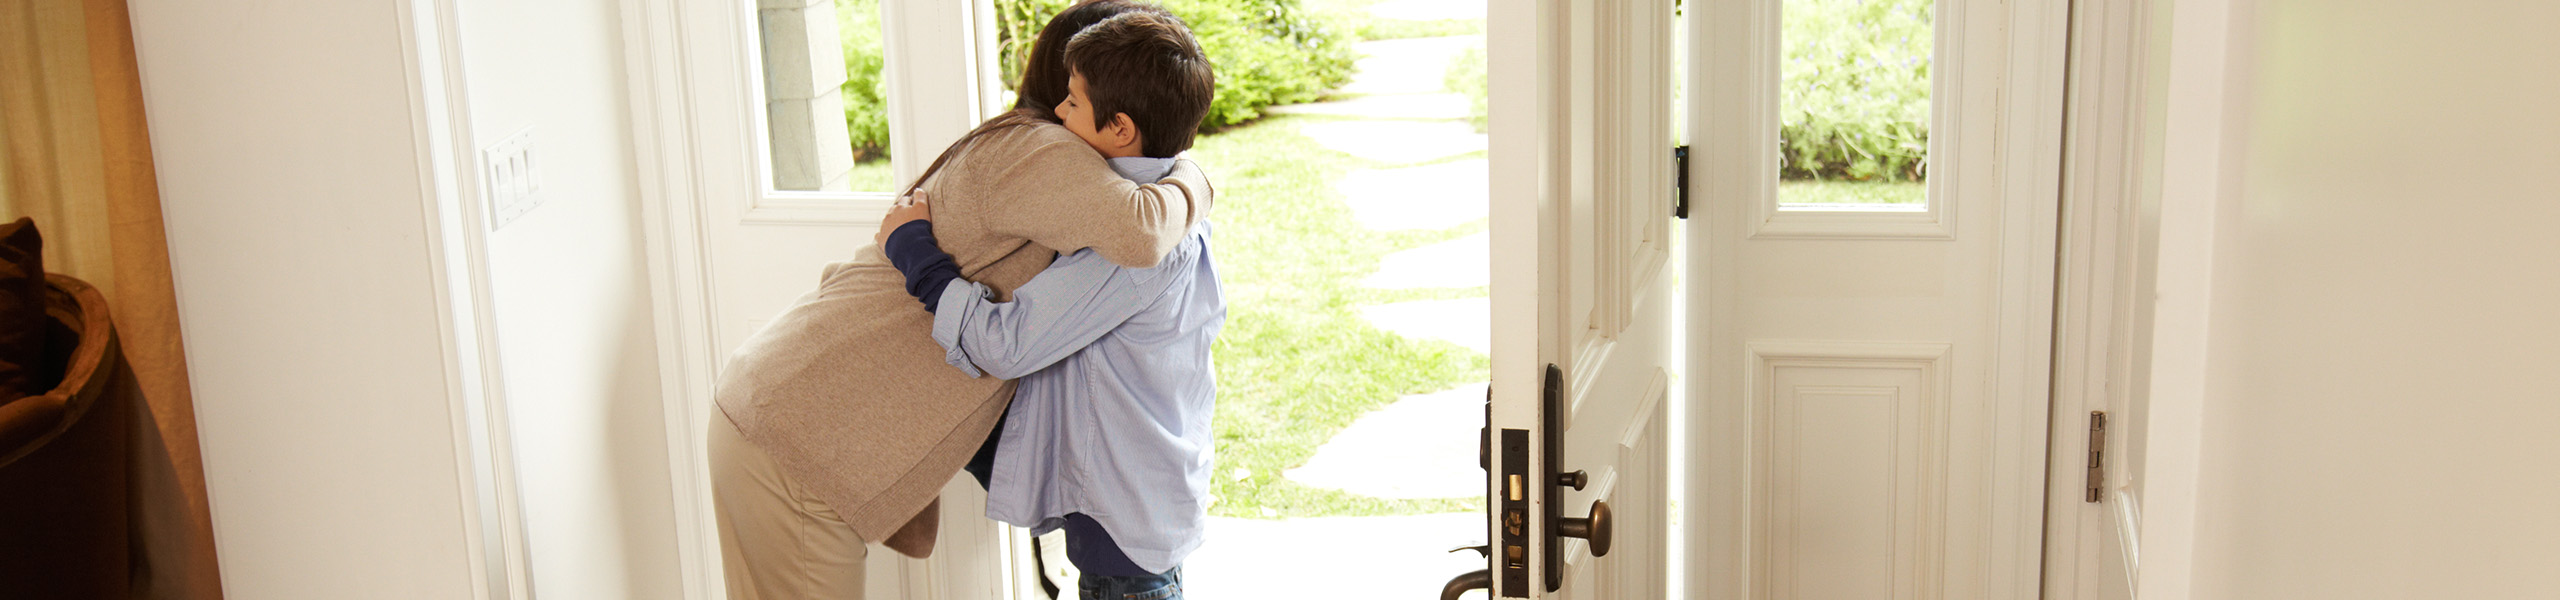 parent hugging their child goodbye at the door